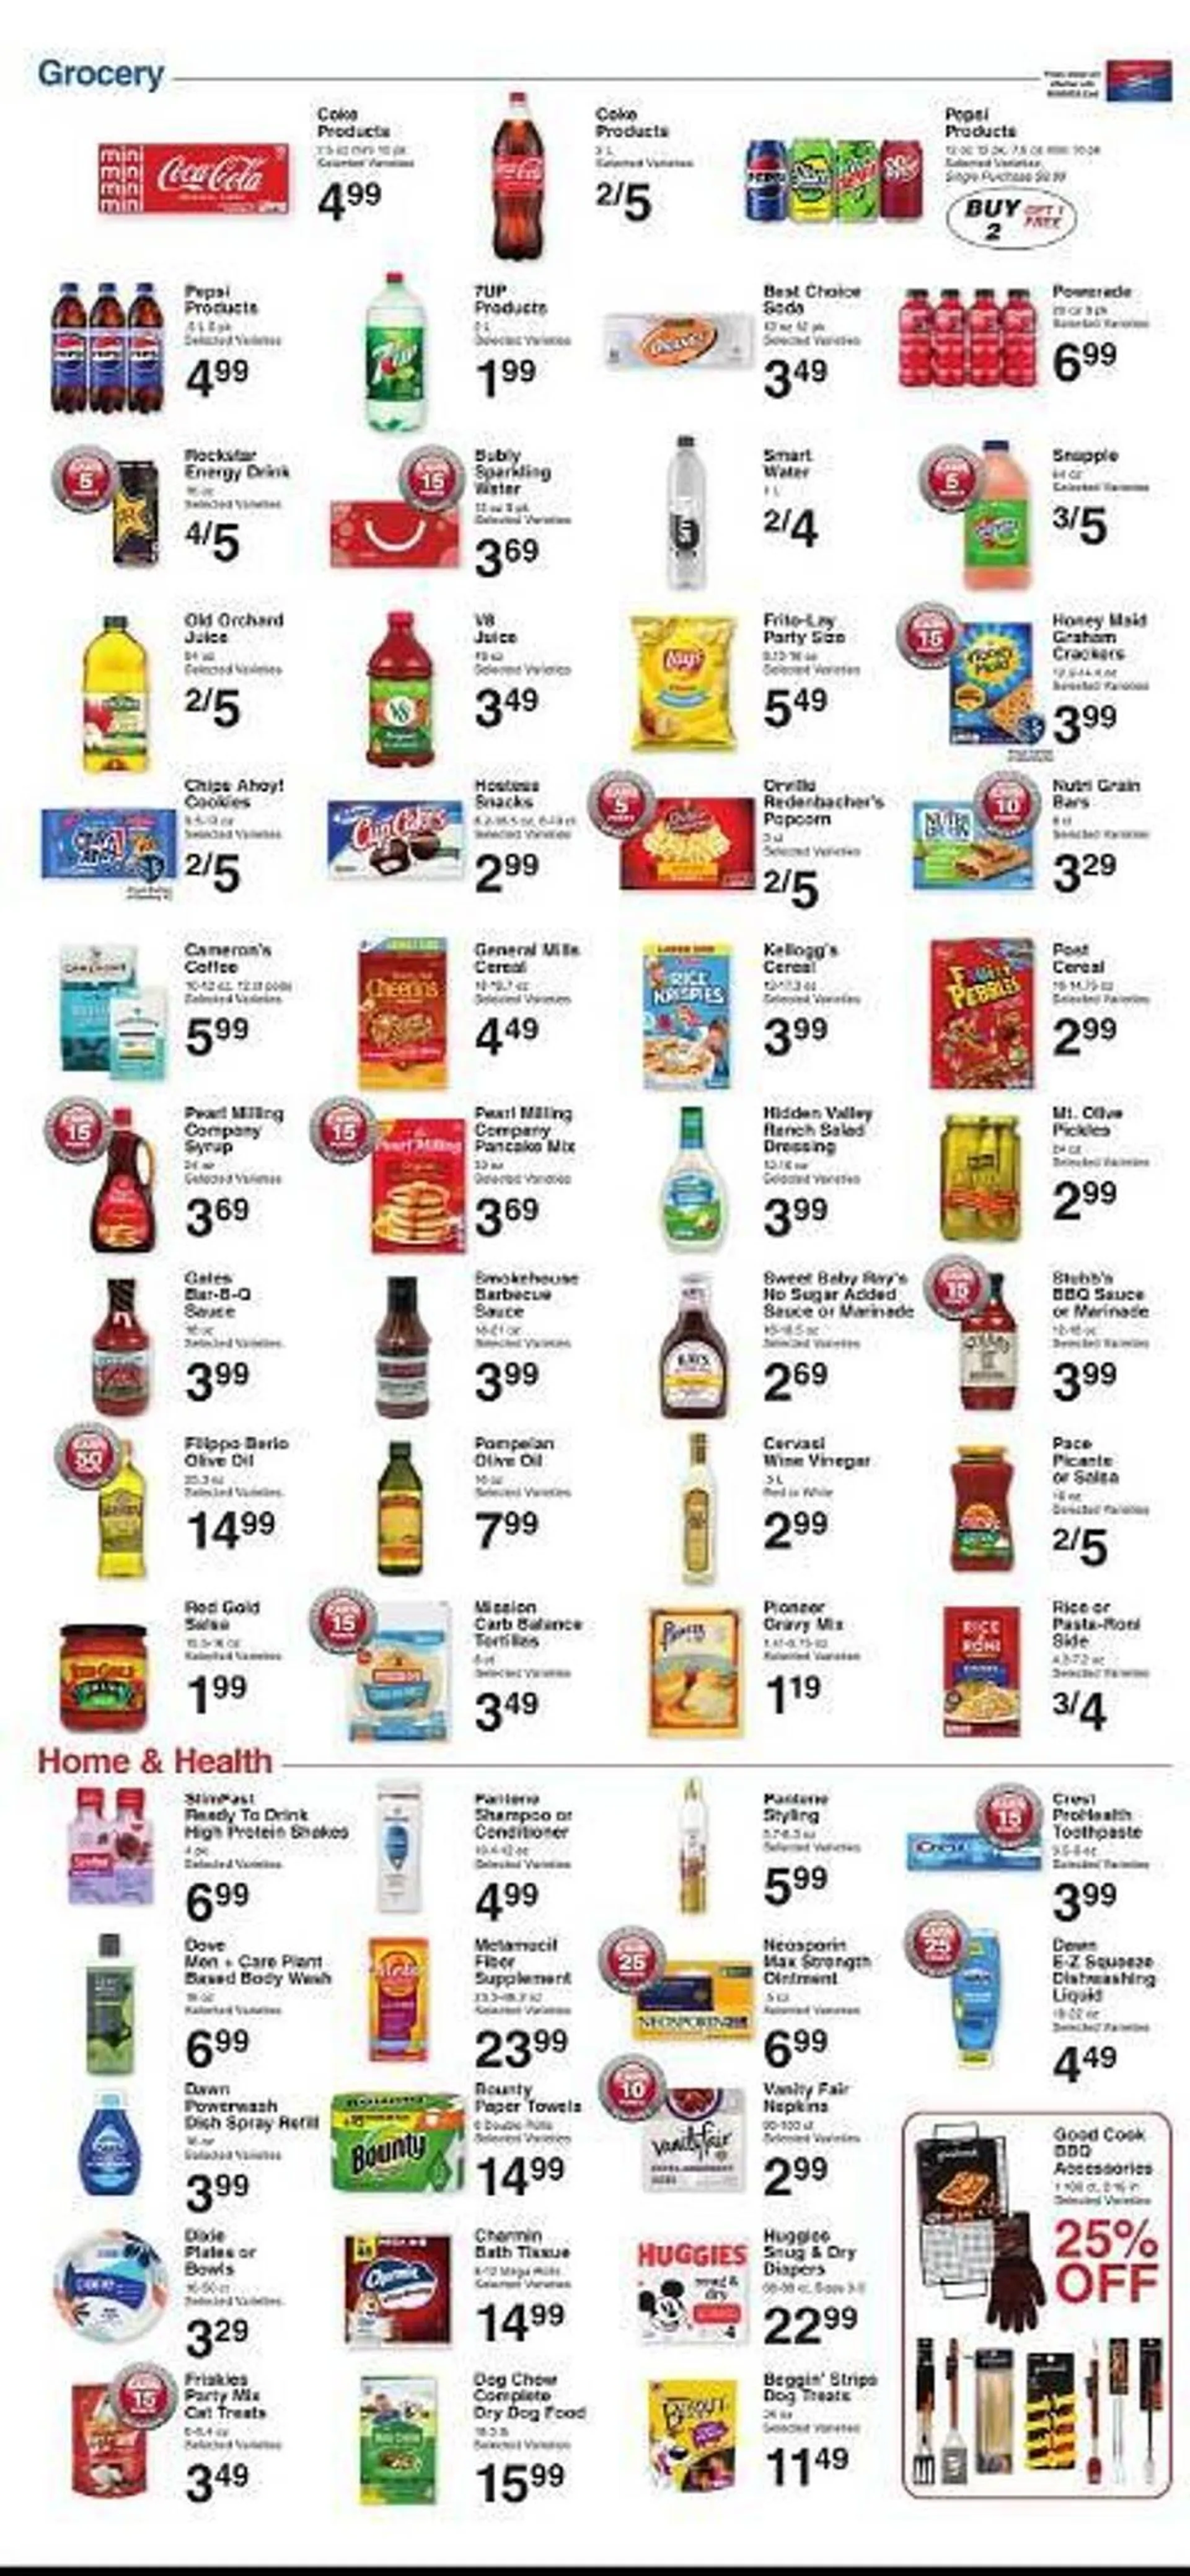 Price Chopper Weekly Ad - 3